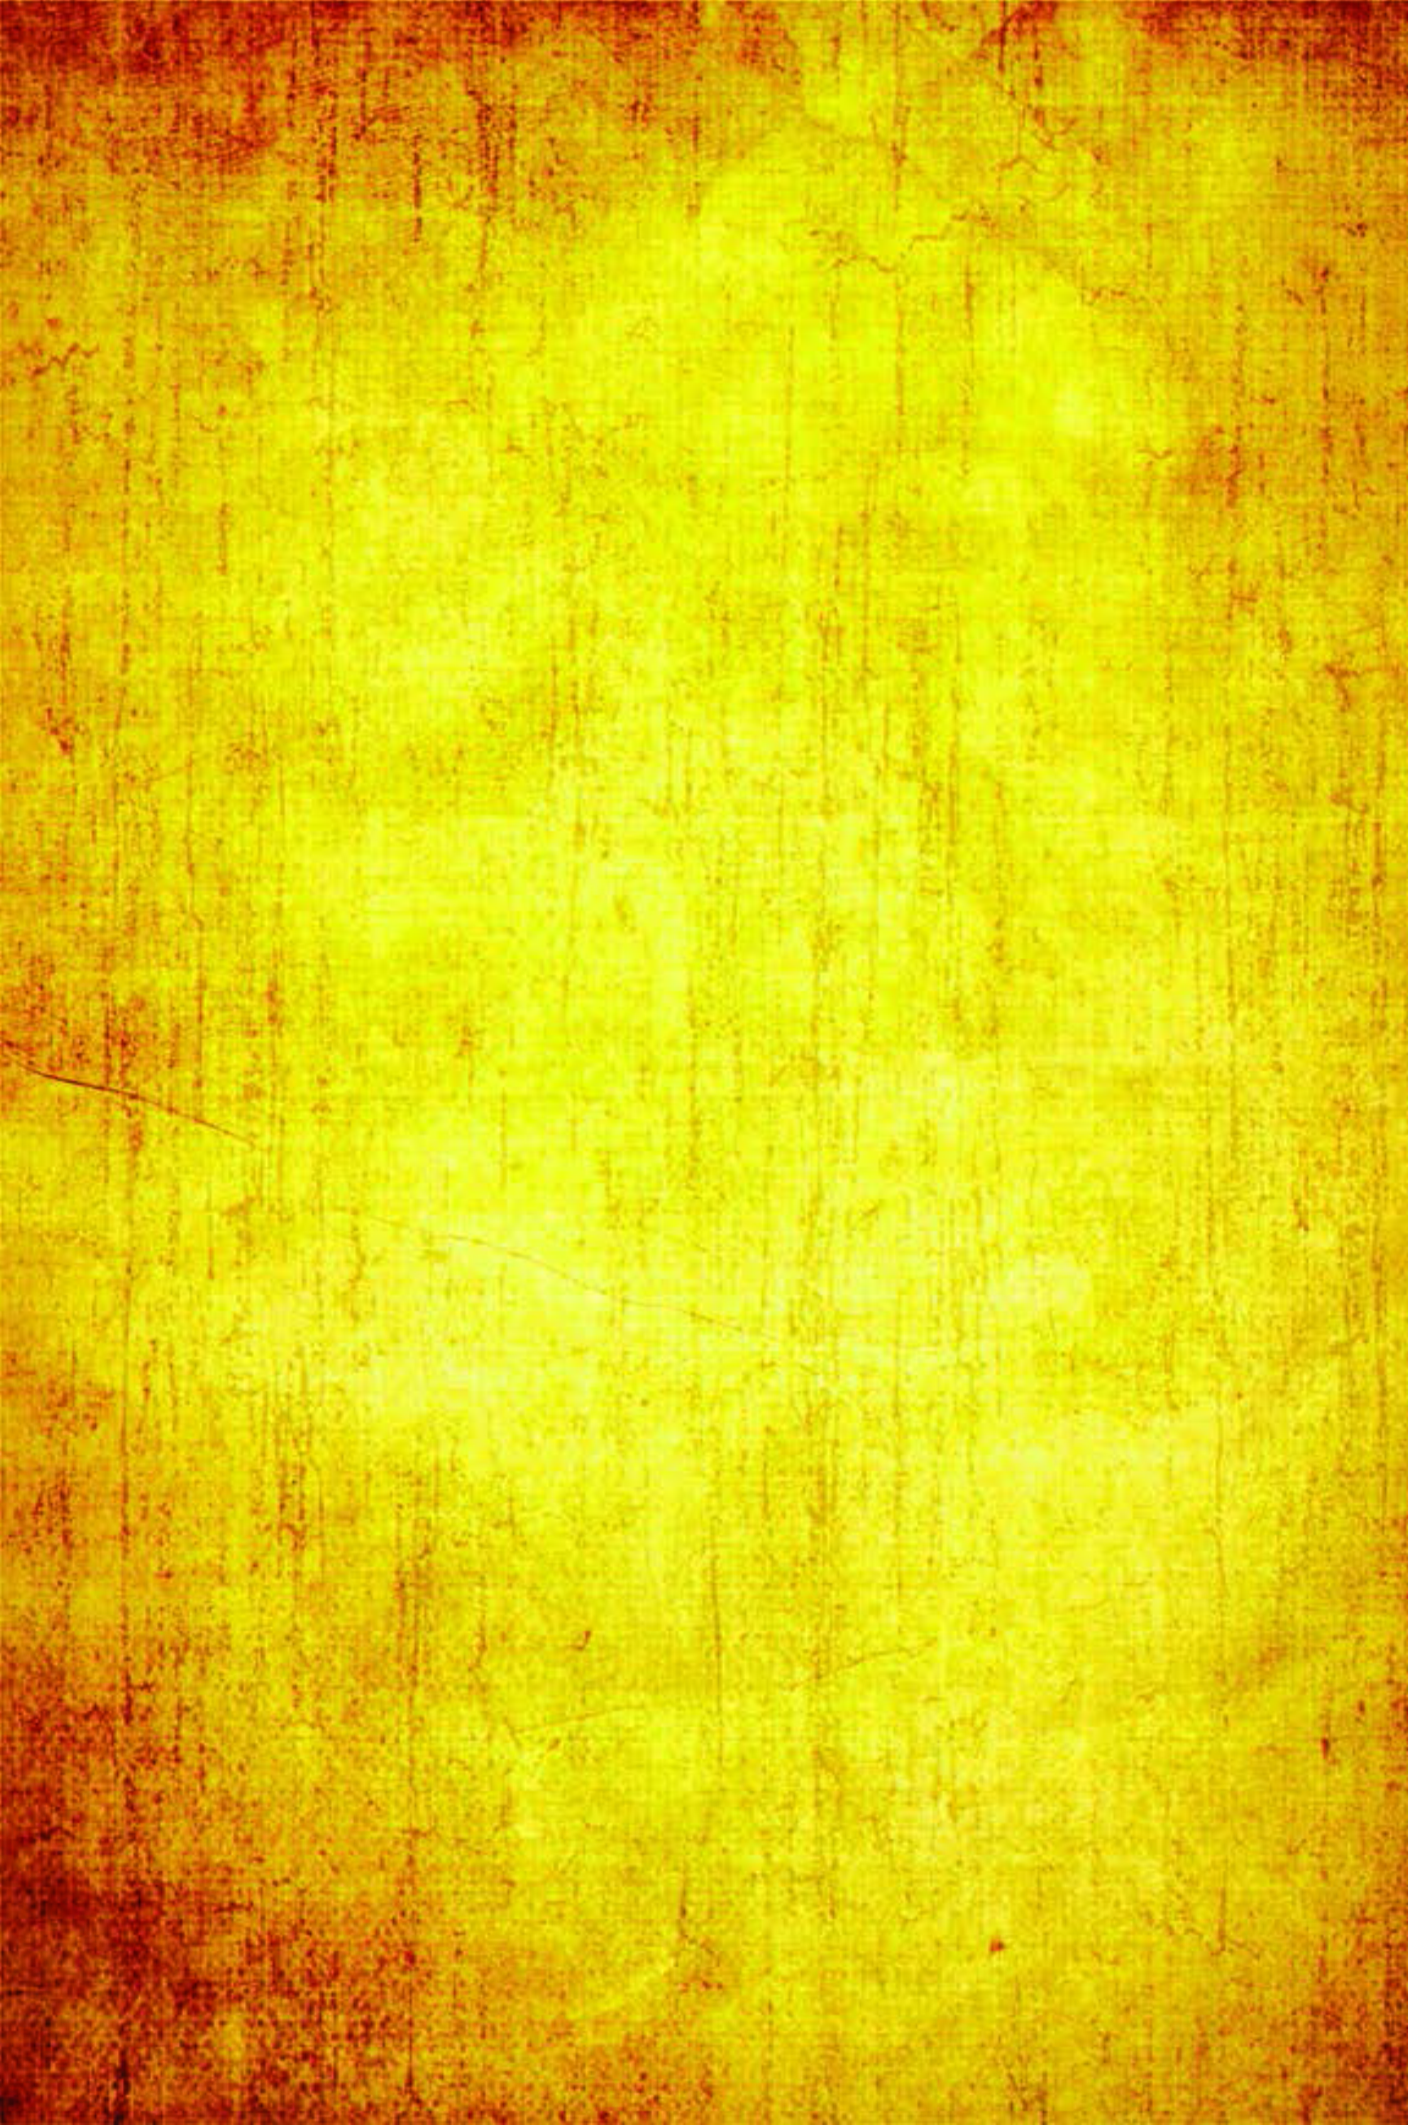 Old Yellow Paper Background - FREE Vector Design - Cdr, Ai, EPS, PNG, SVG